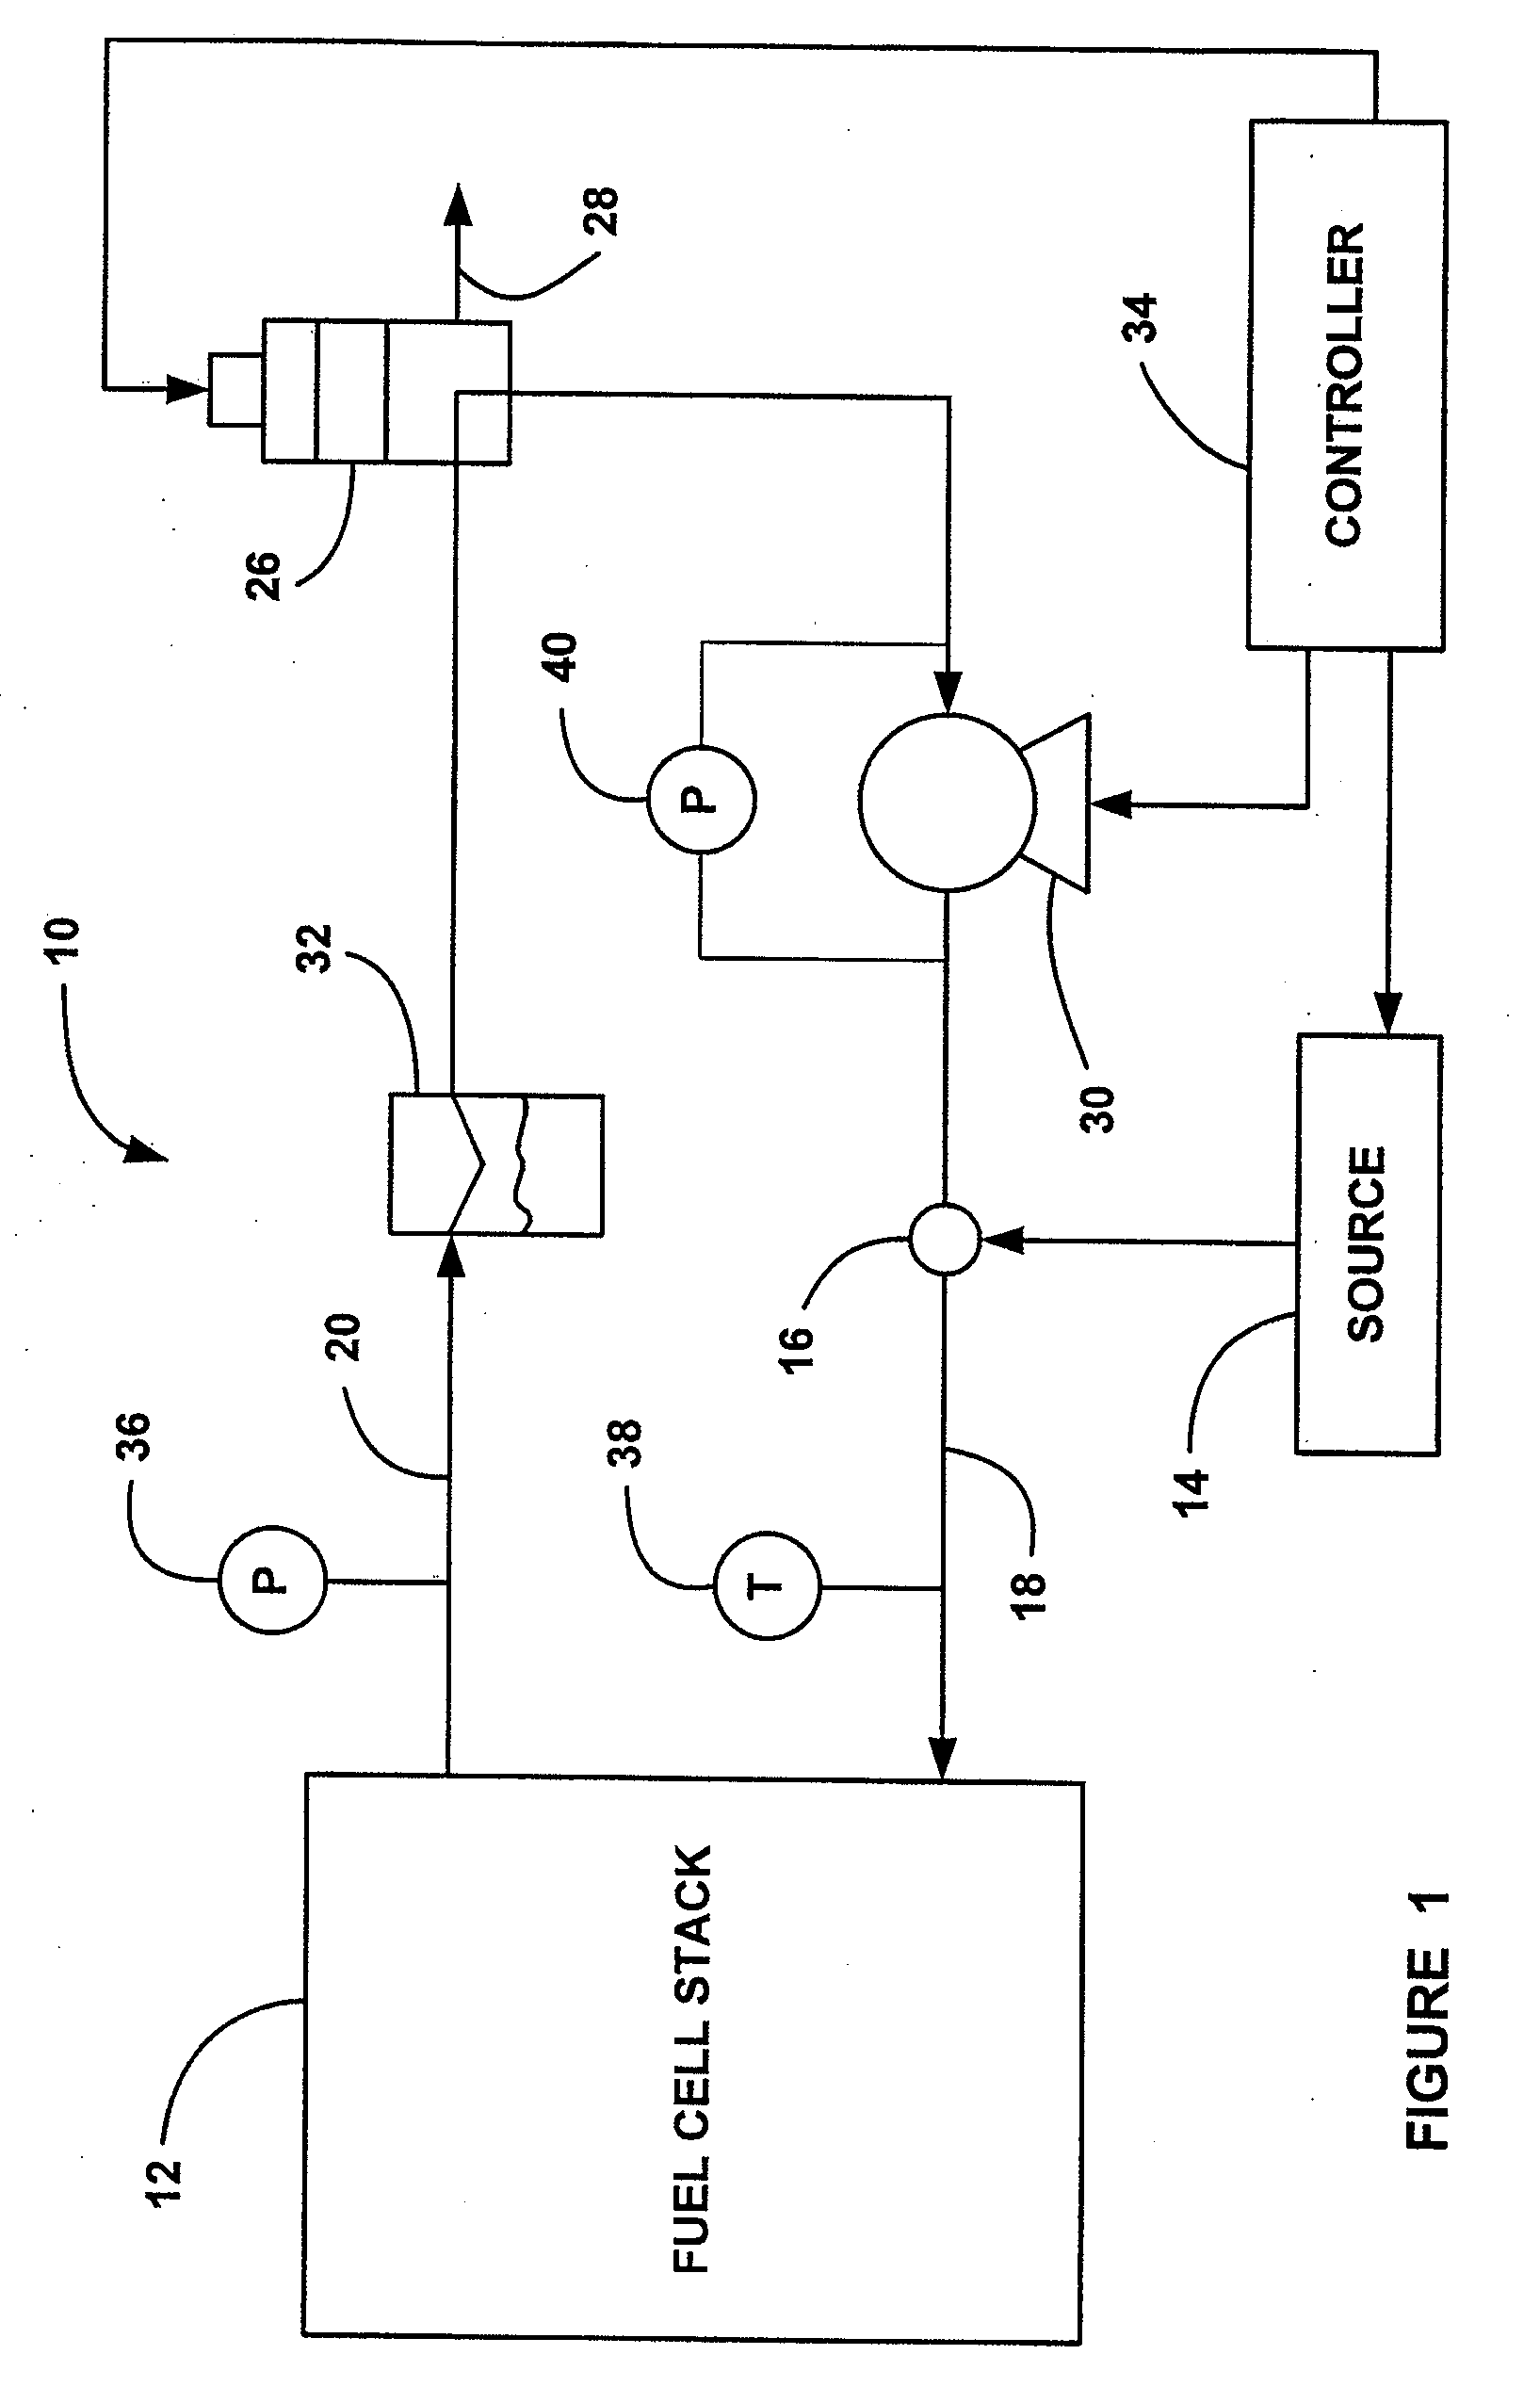 System and method for controlling an anode side recirculation pump in a fuel cell system